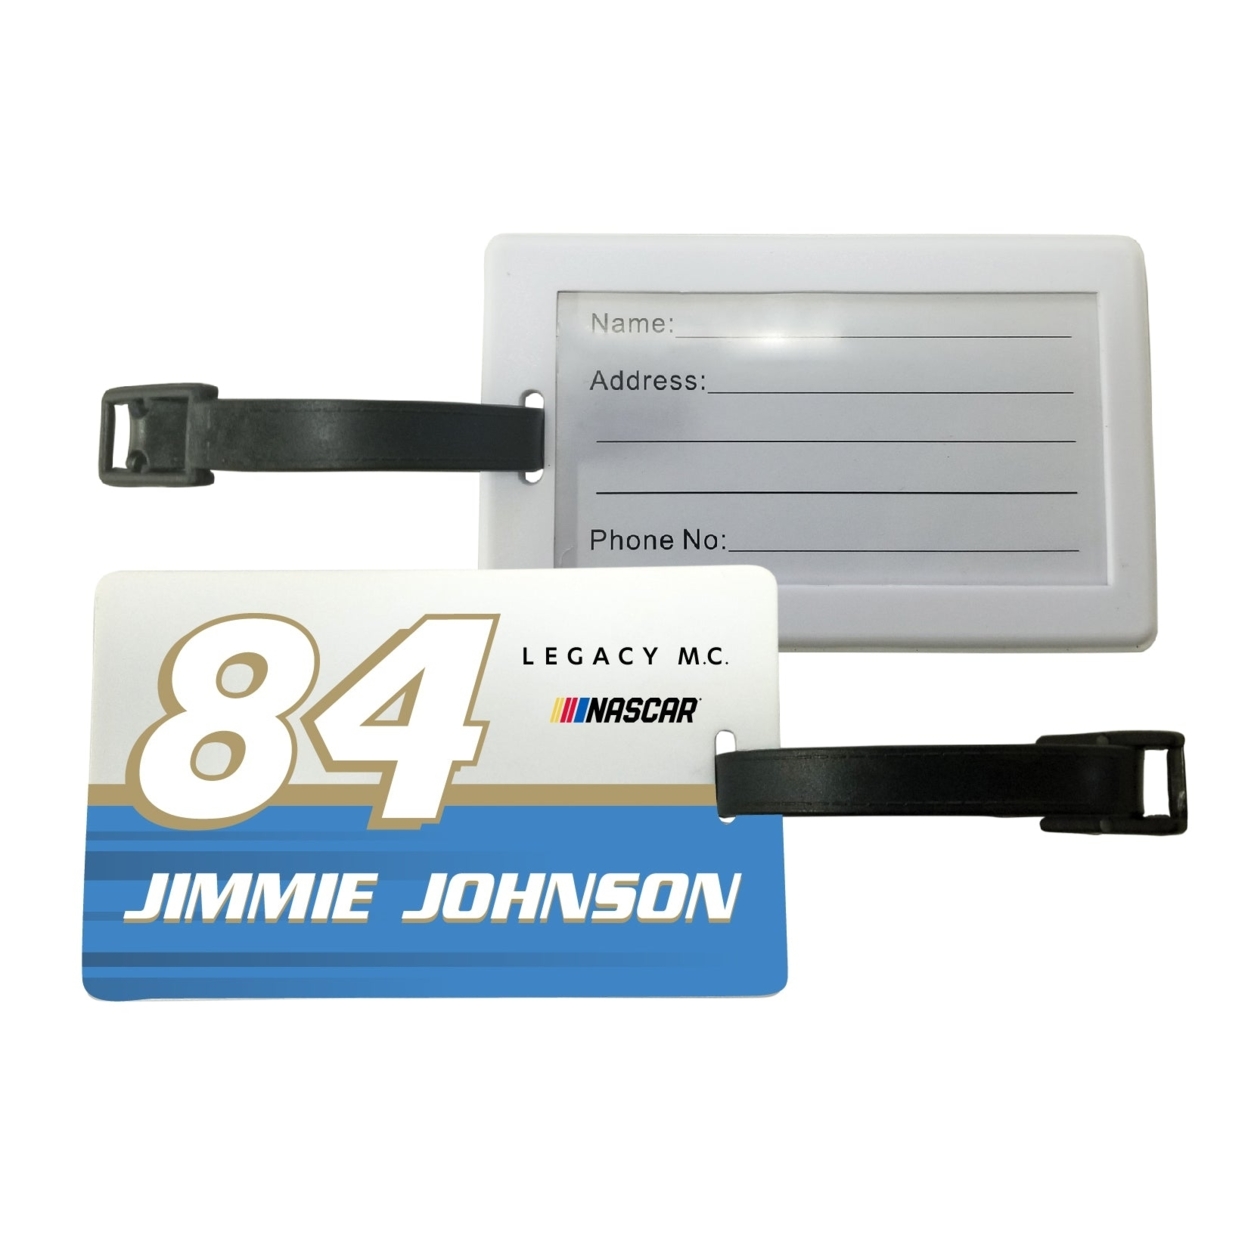 #84 Jimmie Johnson Officially Licensed Luggage Tag